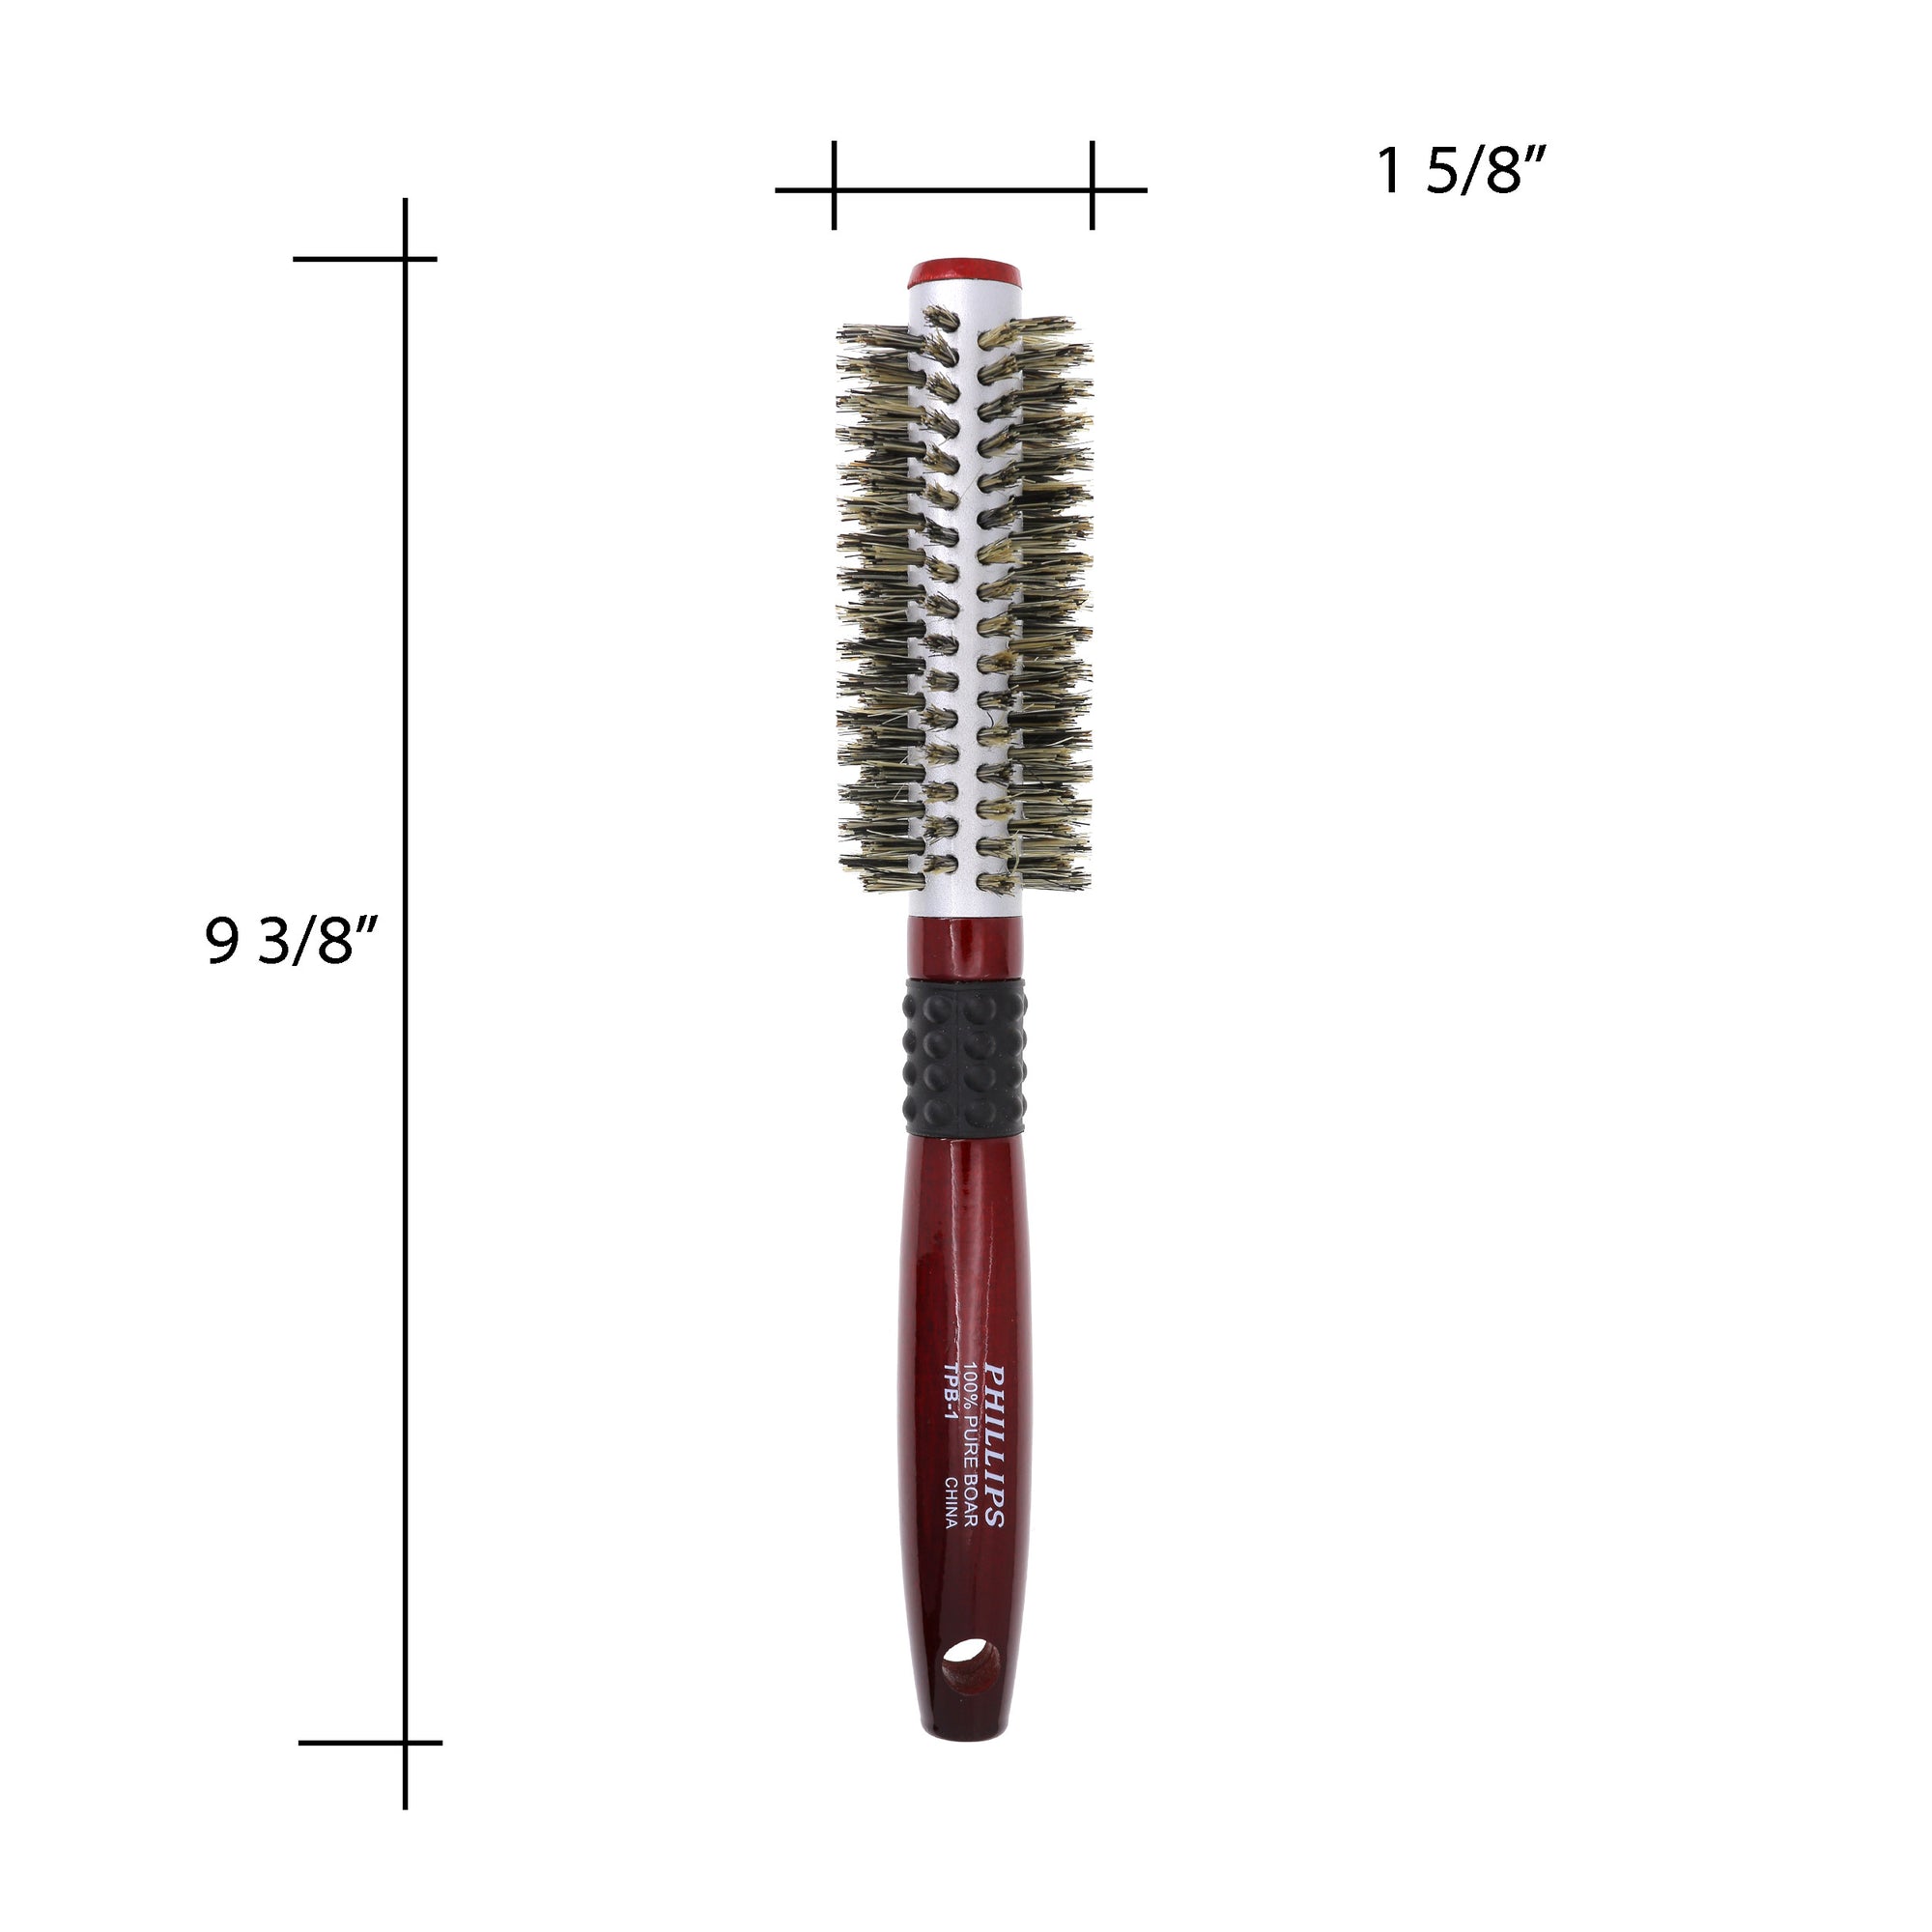 1.5" Natural Bristle Round Hair Brush with Metal Core